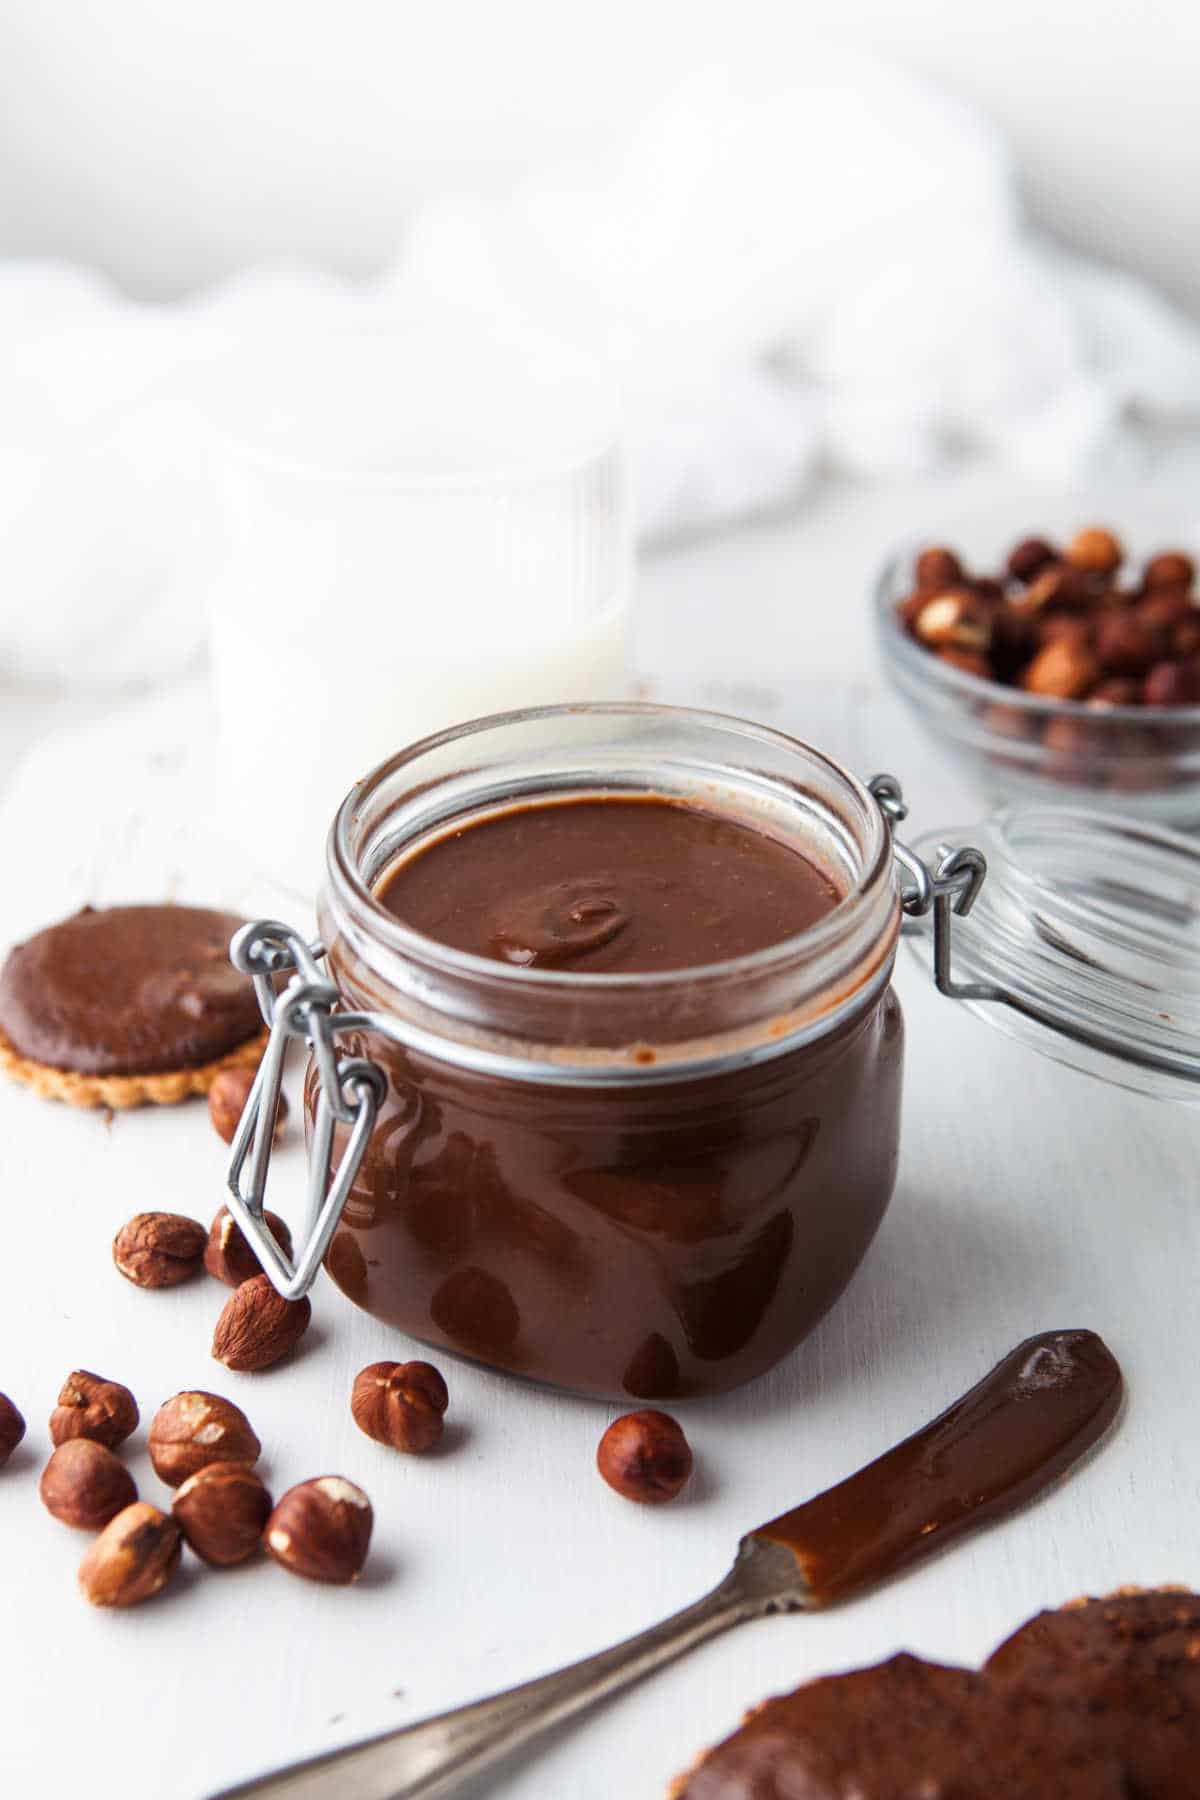 Glass jar of homemade nutella next to hazelnuts and a knife with nutella on it.